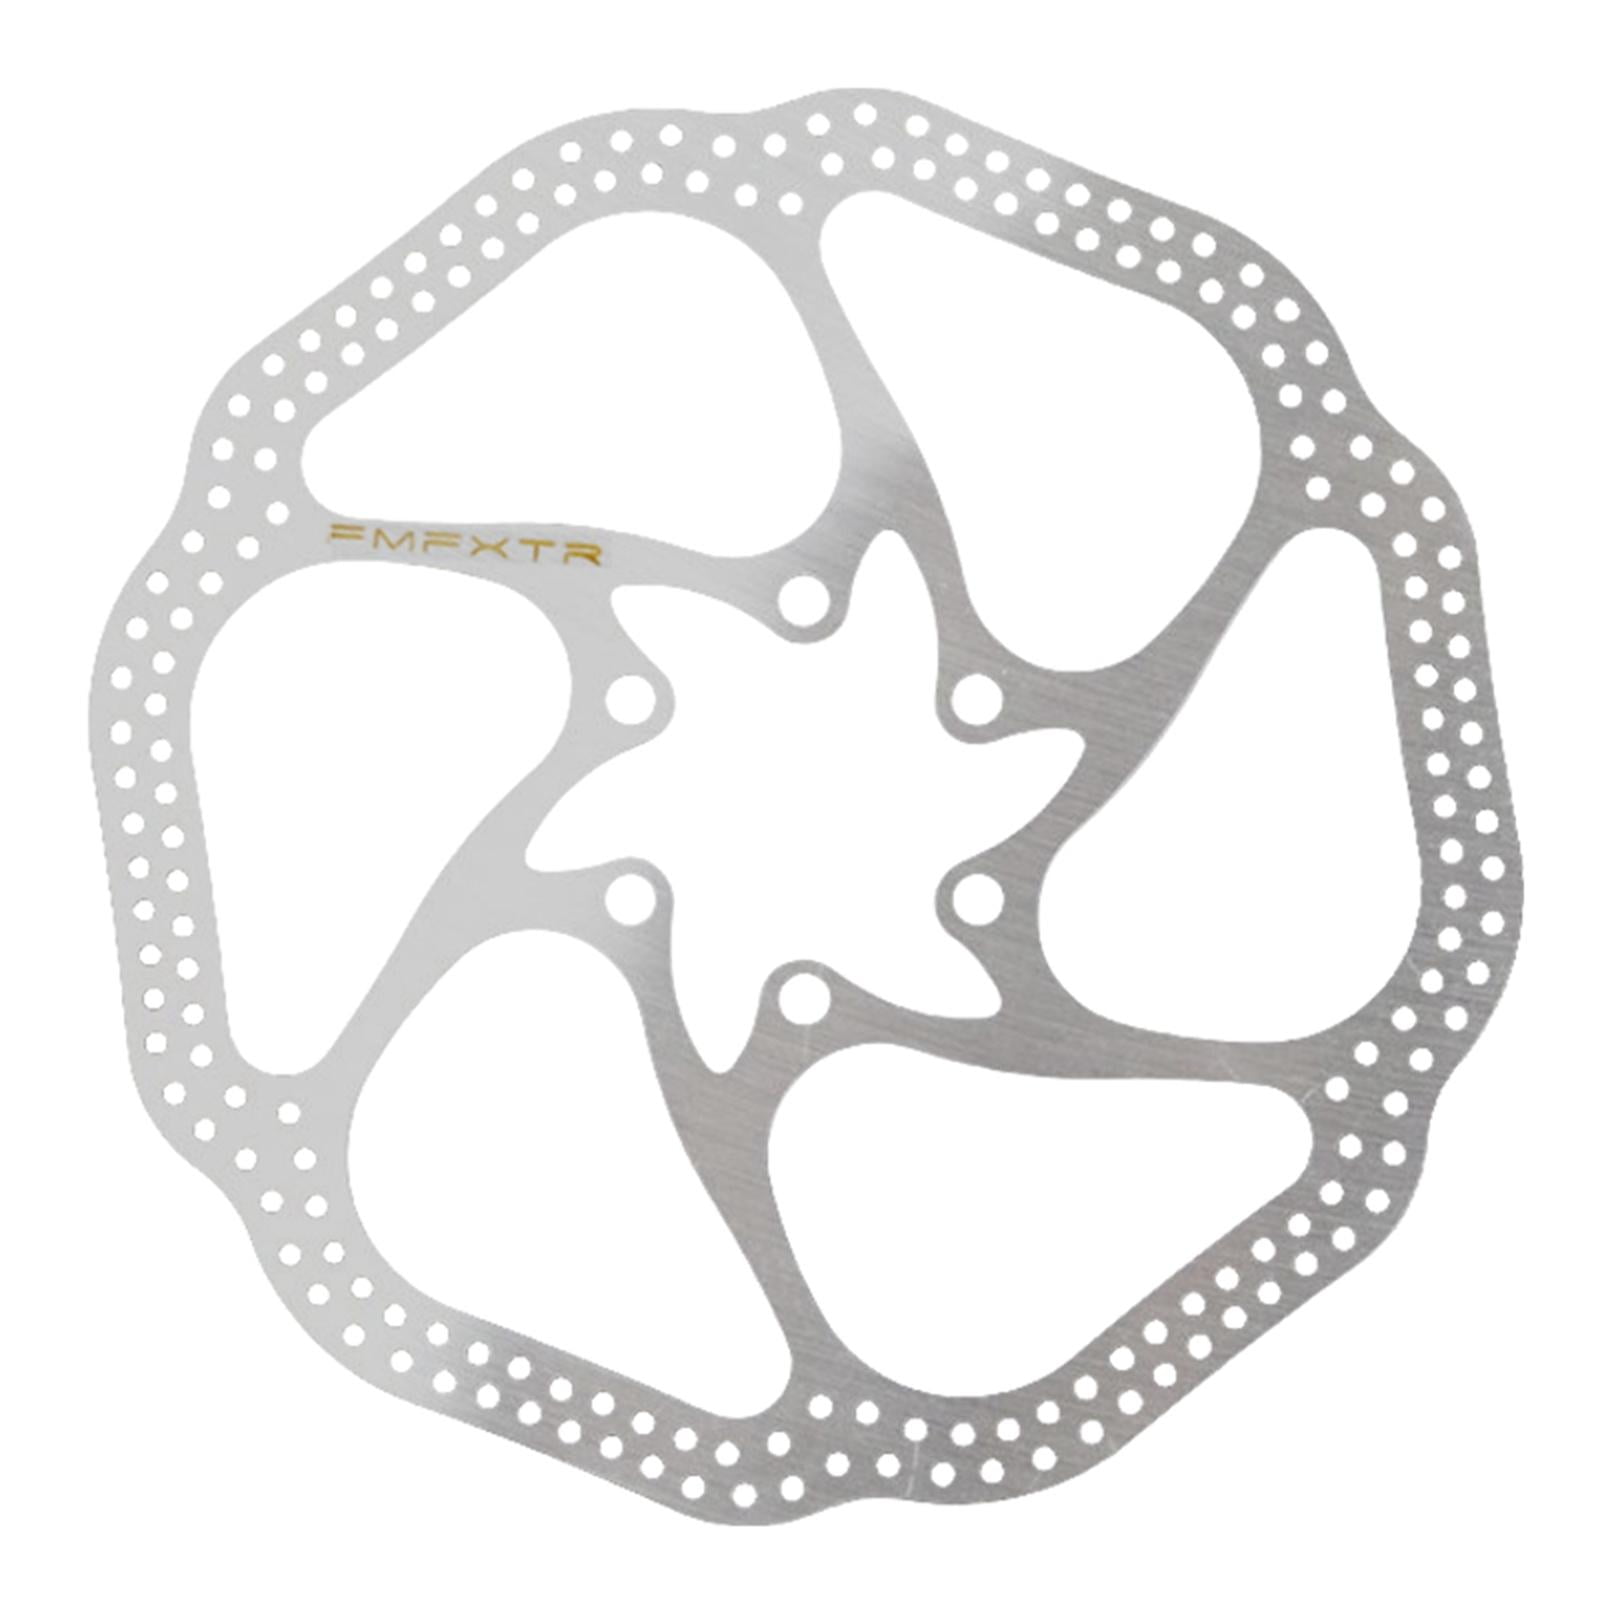 Details about   160mm BICYCLE DISC BRAKE ROTOR BIKE PARTS CB310 